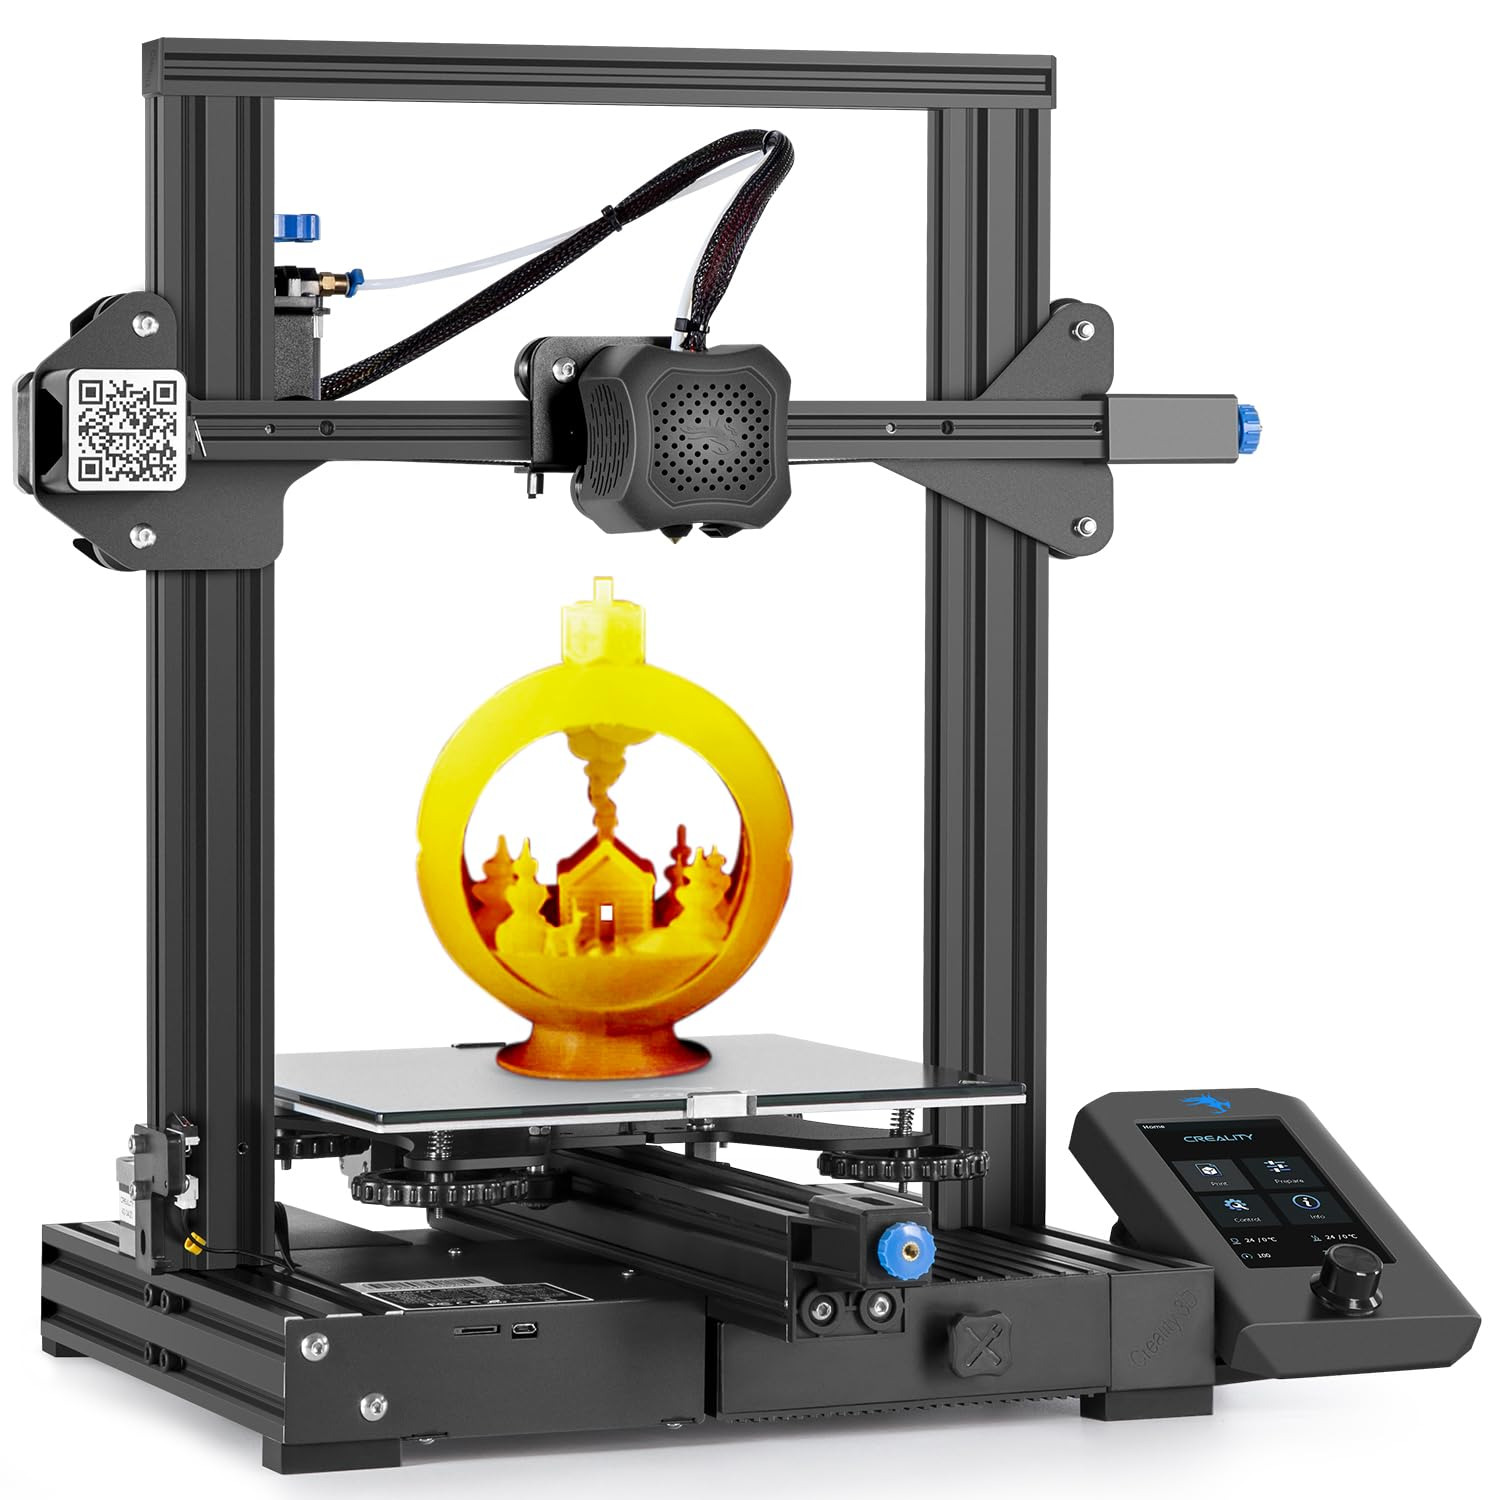 Official Creality Ender 3 V2 Upgraded 3D Printer with Silent Motherboard Branded